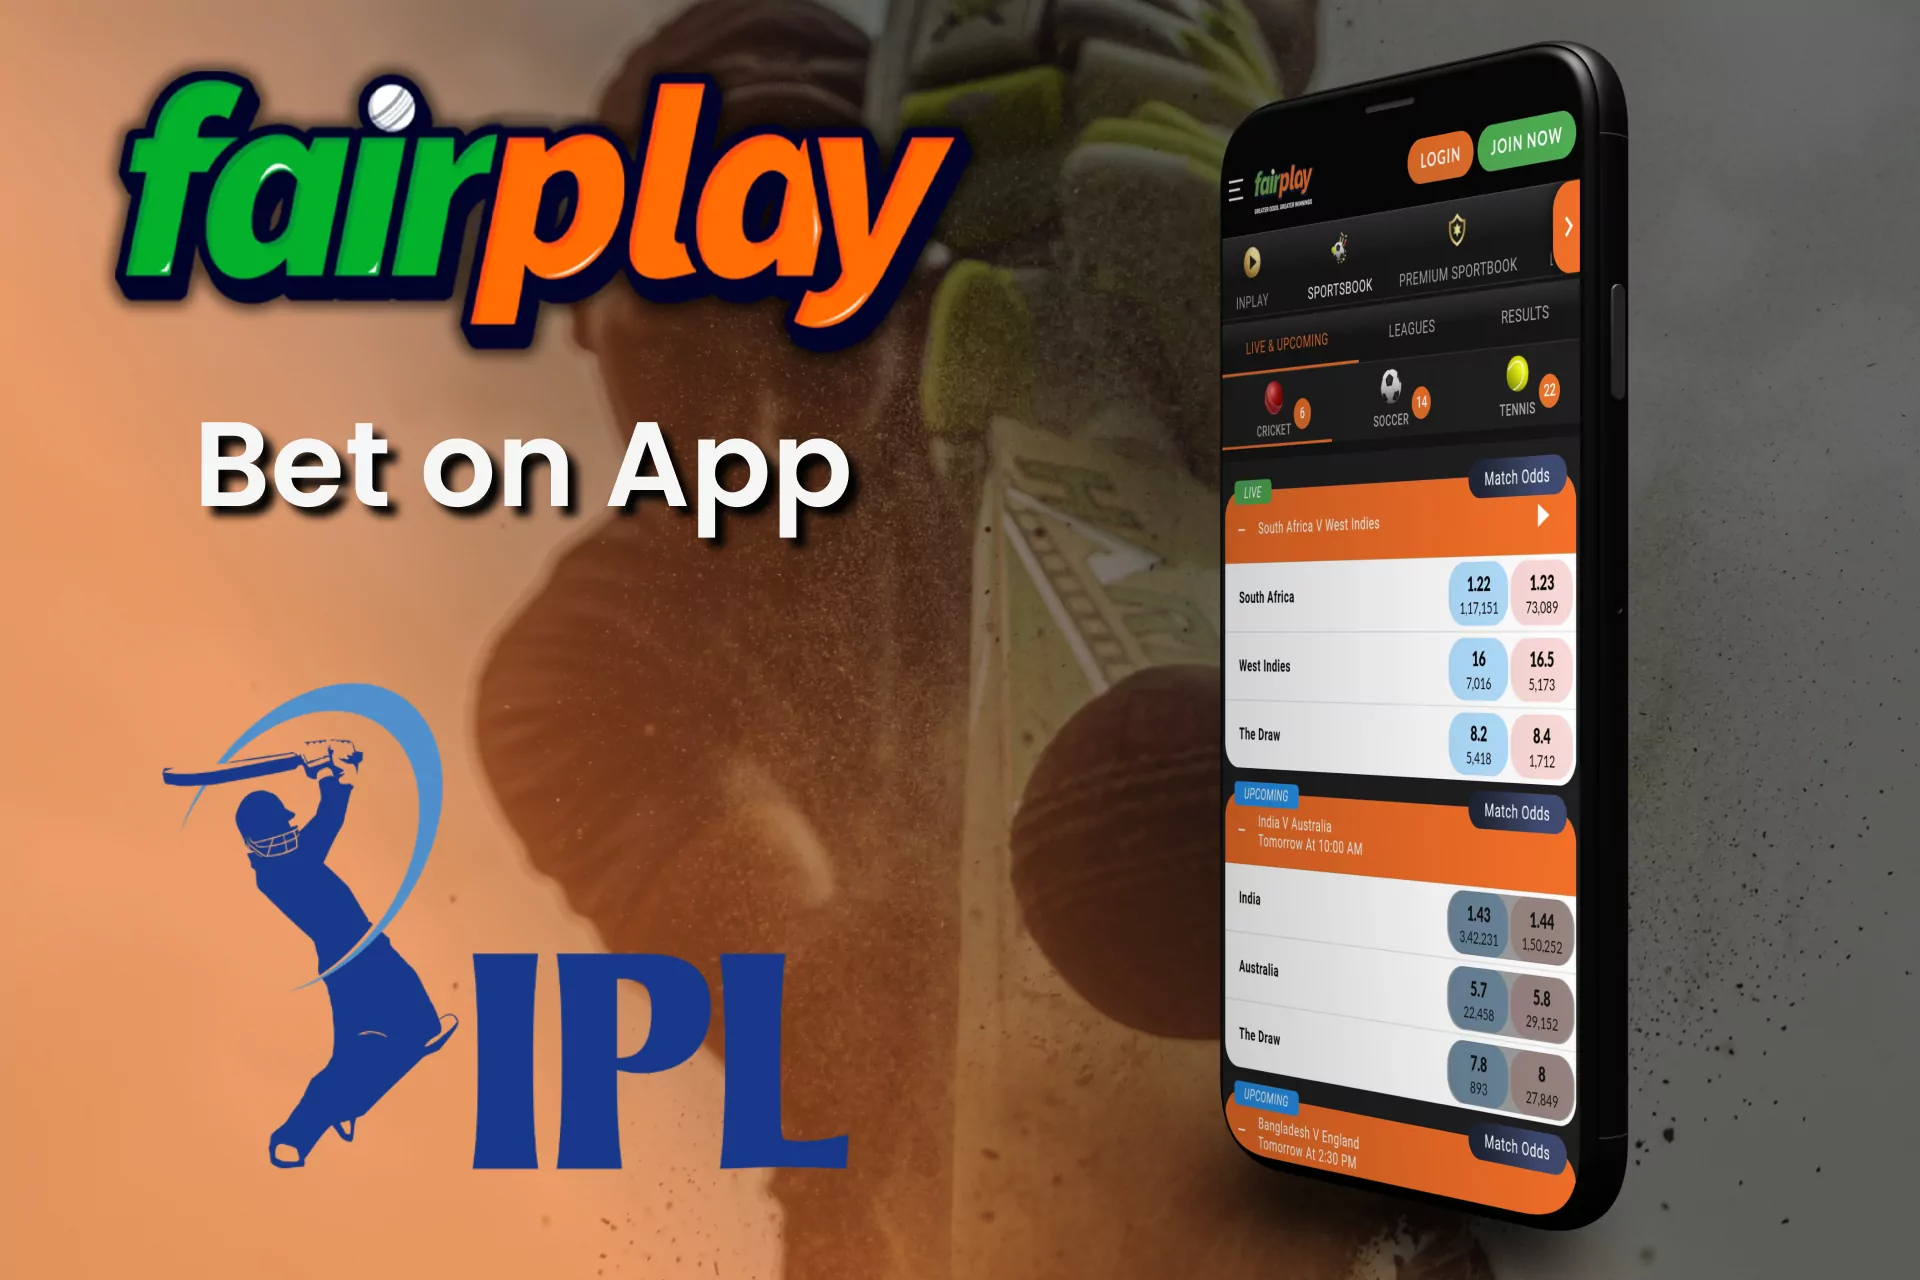 Bet on IPL on your phone with Fairplay.